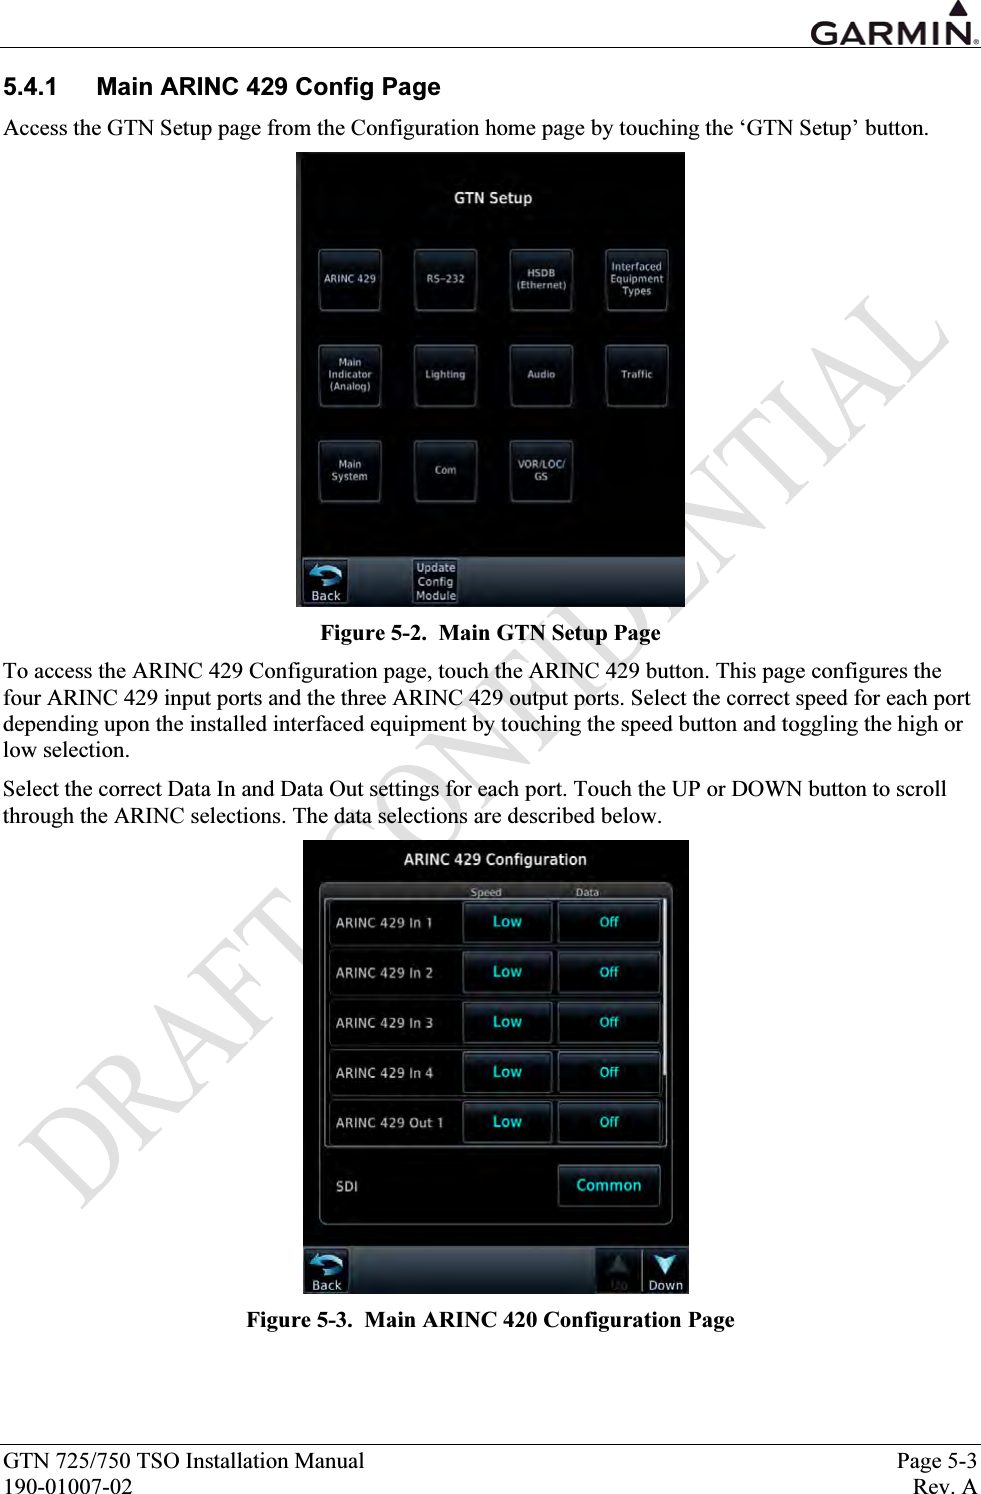  GTN 725/750 TSO Installation Manual  Page 5-3 190-01007-02  Rev. A 5.4.1  Main ARINC 429 Config Page Access the GTN Setup page from the Configuration home page by touching the ‘GTN Setup’ button.   Figure 5-2.  Main GTN Setup Page To access the ARINC 429 Configuration page, touch the ARINC 429 button. This page configures the four ARINC 429 input ports and the three ARINC 429 output ports. Select the correct speed for each port depending upon the installed interfaced equipment by touching the speed button and toggling the high or low selection. Select the correct Data In and Data Out settings for each port. Touch the UP or DOWN button to scroll through the ARINC selections. The data selections are described below.     Figure 5-3.  Main ARINC 420 Configuration Page 